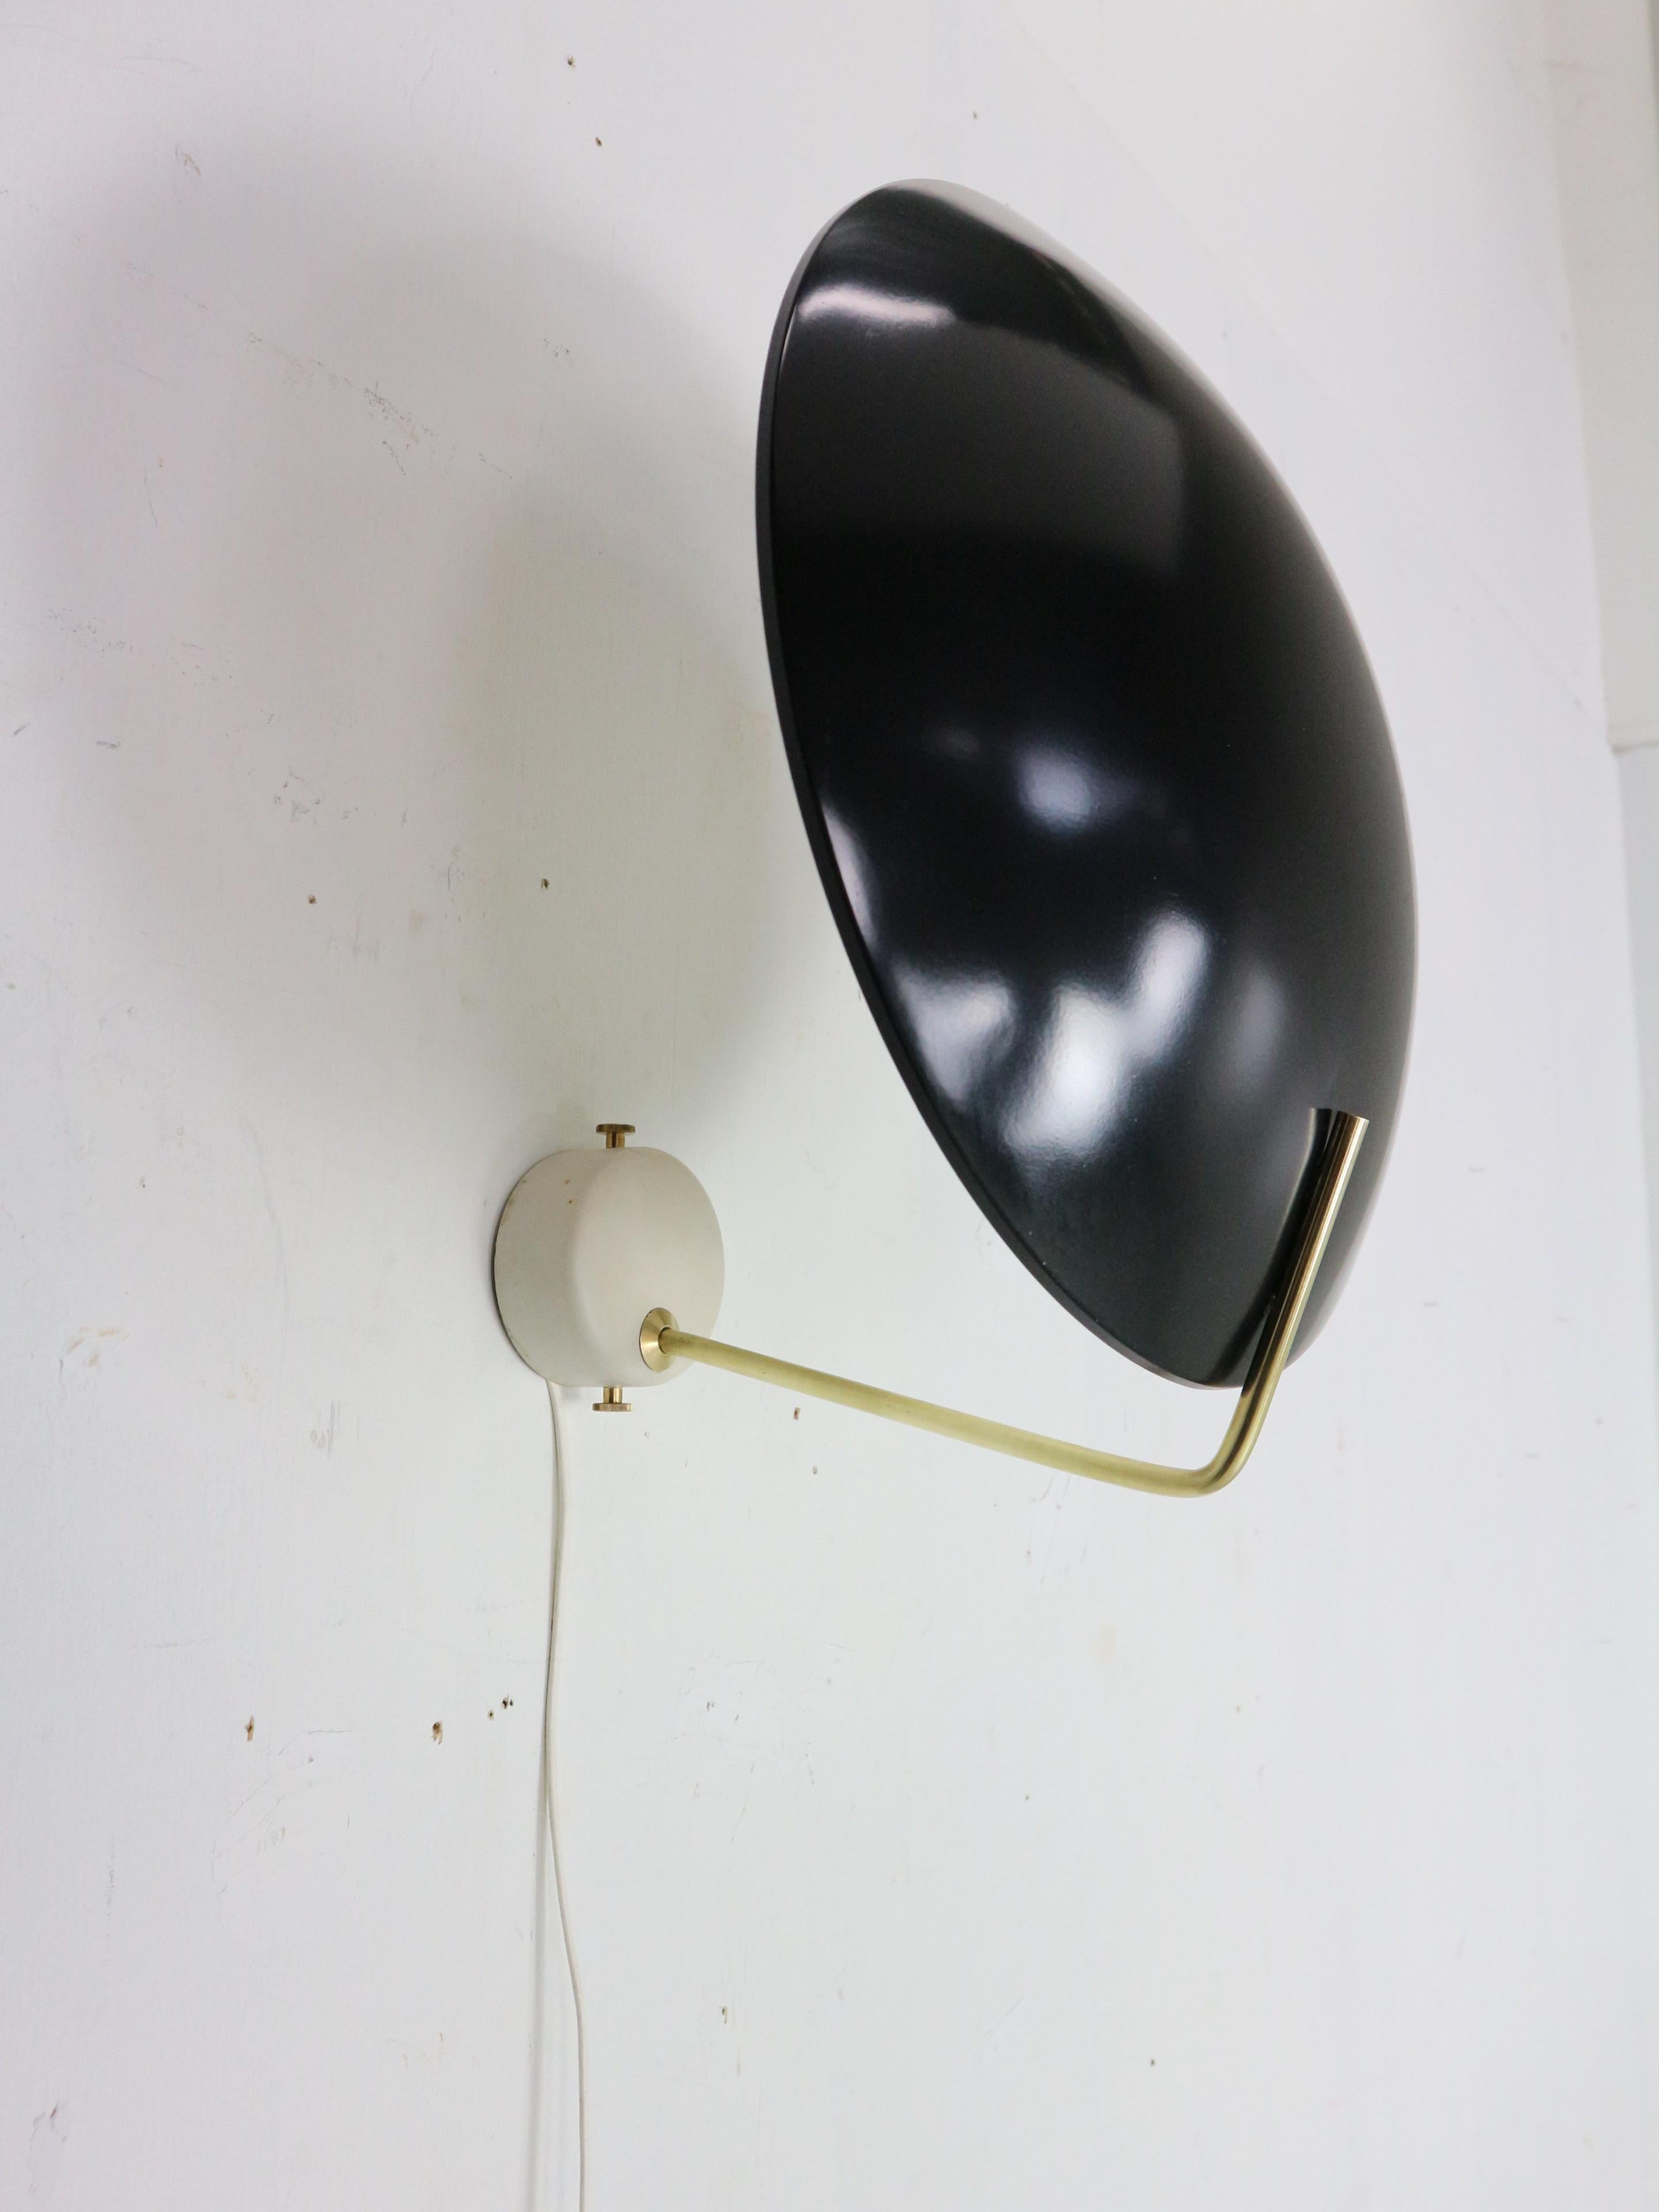 Elegant wall light designed by Bruno Gatta and manufactured for Stilnovo in 1960's Italy.
Model - 232.
Tested- working.

This table light features a black lacquered aluminium shade with a brass rod on a white carrara marble base.

We choose